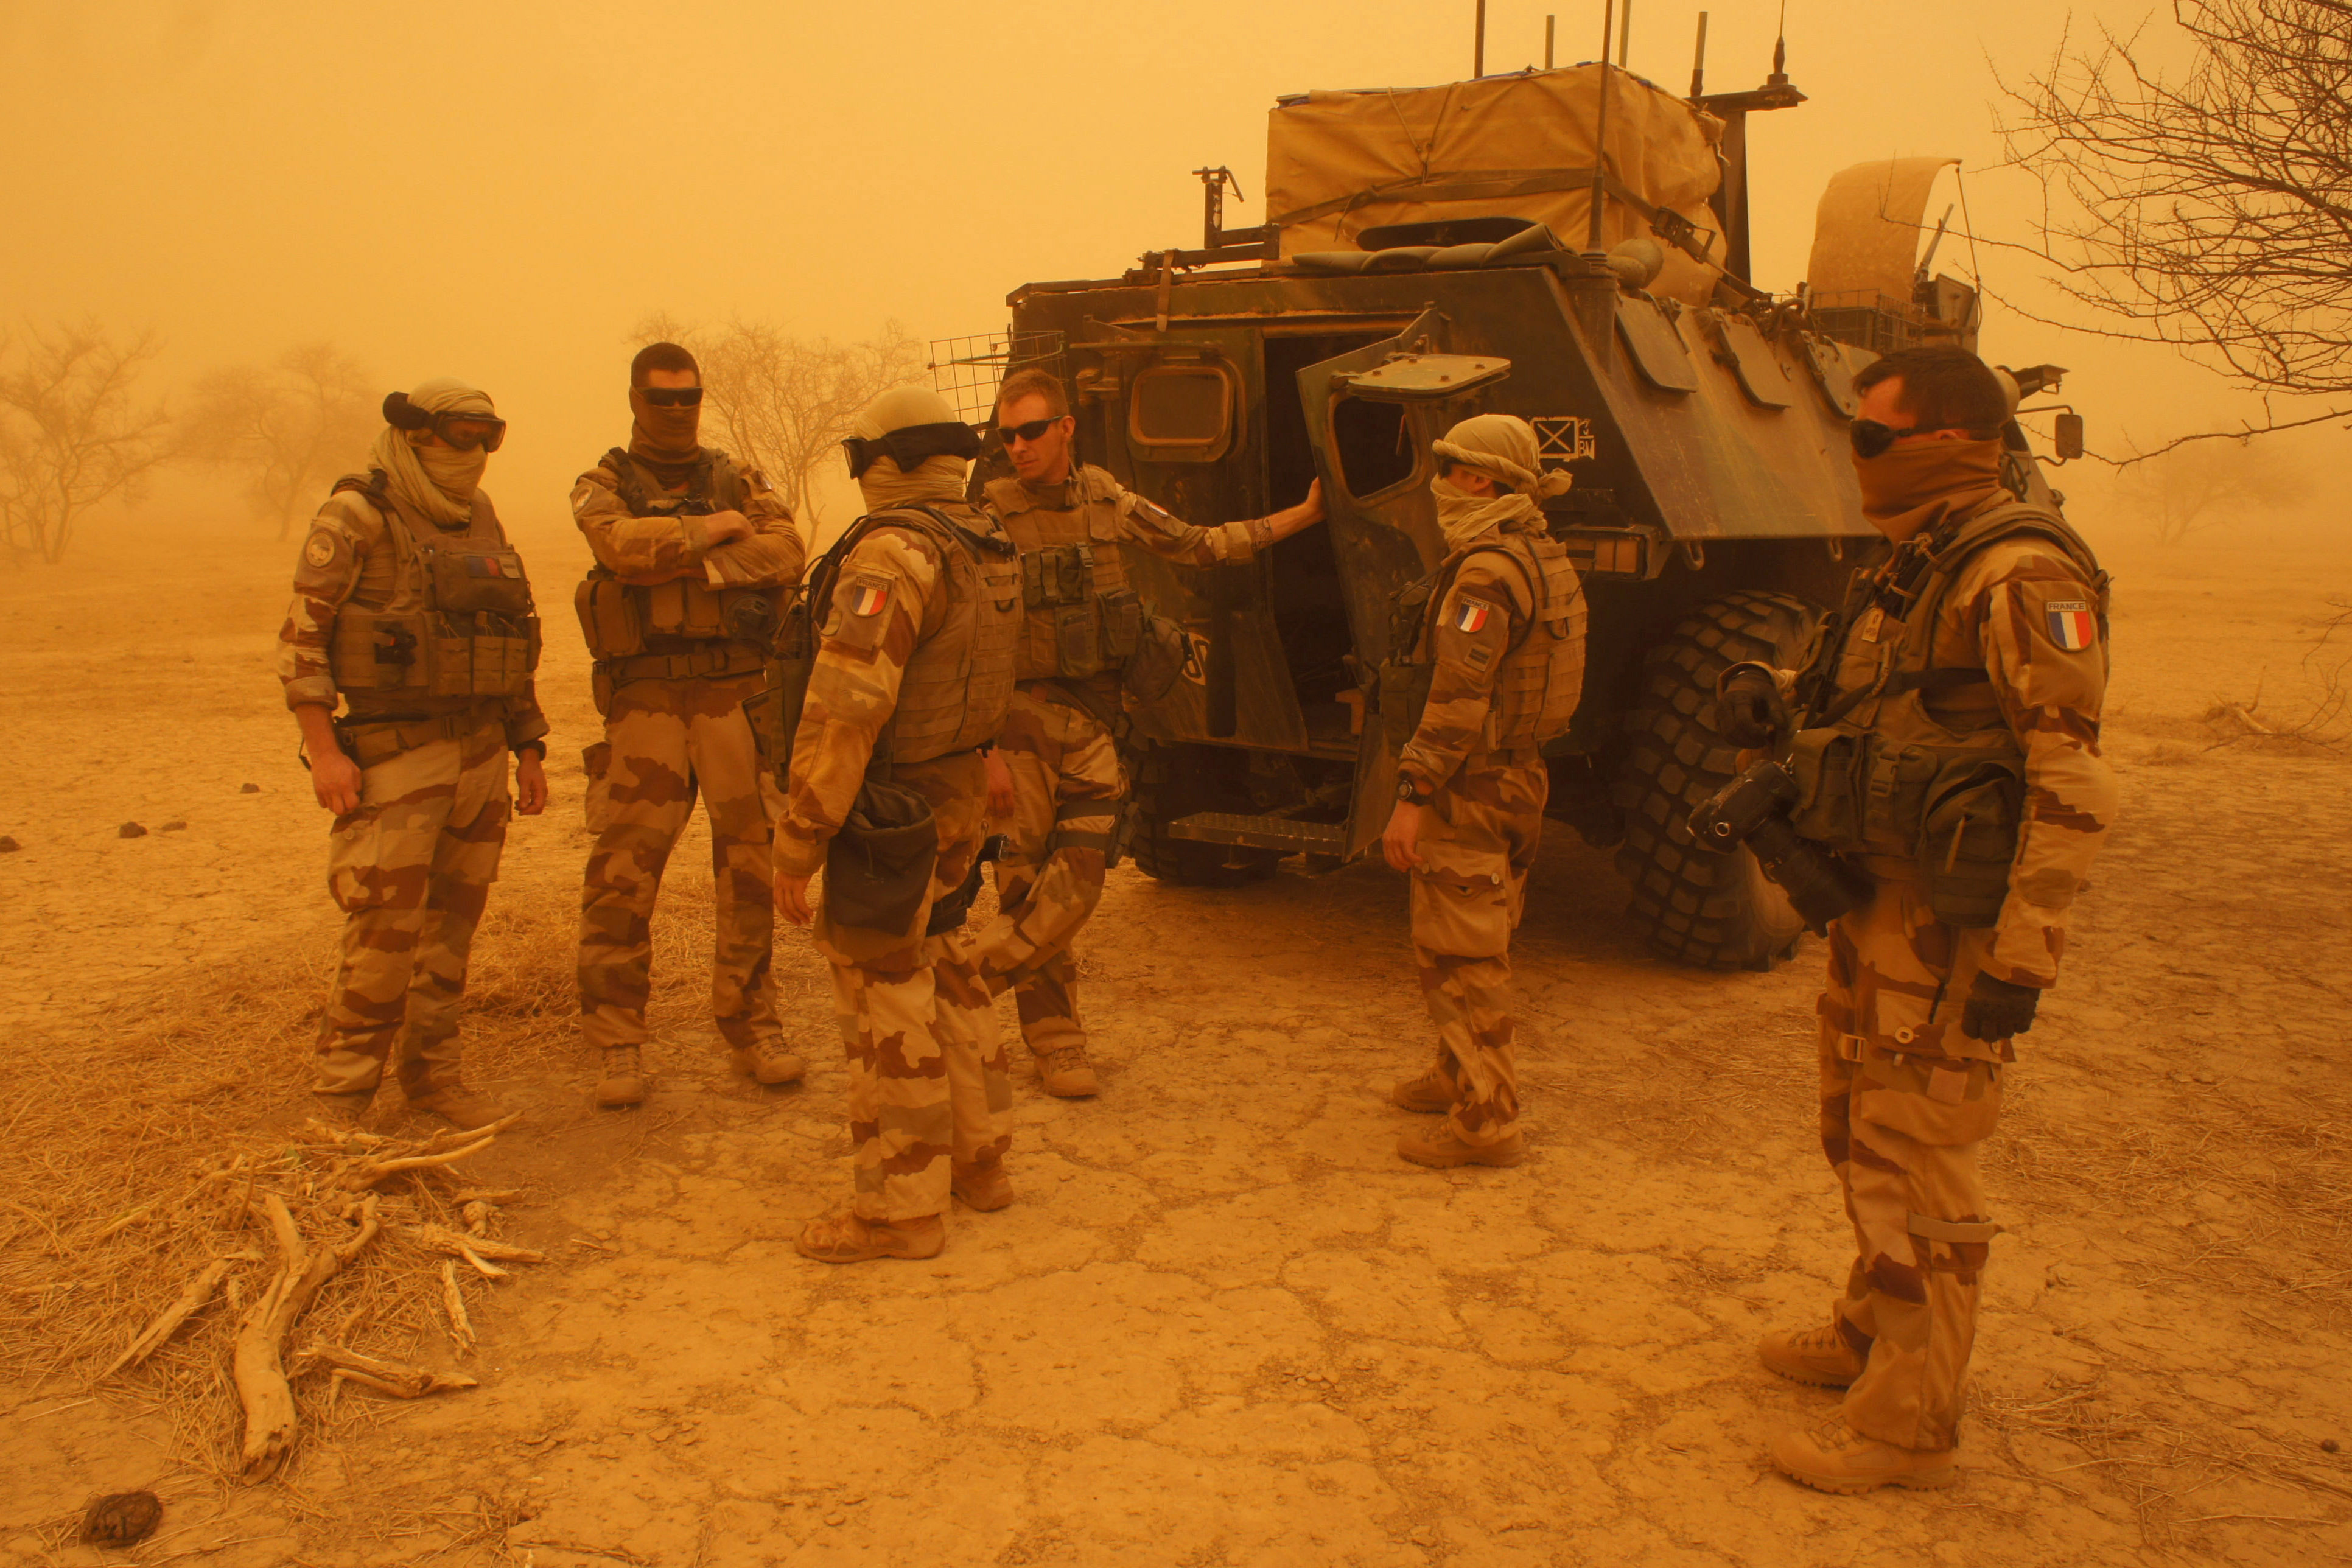 French soldiers from Operation Barkhane stand outside their armored personnel carrier during a sandstorm in Inat